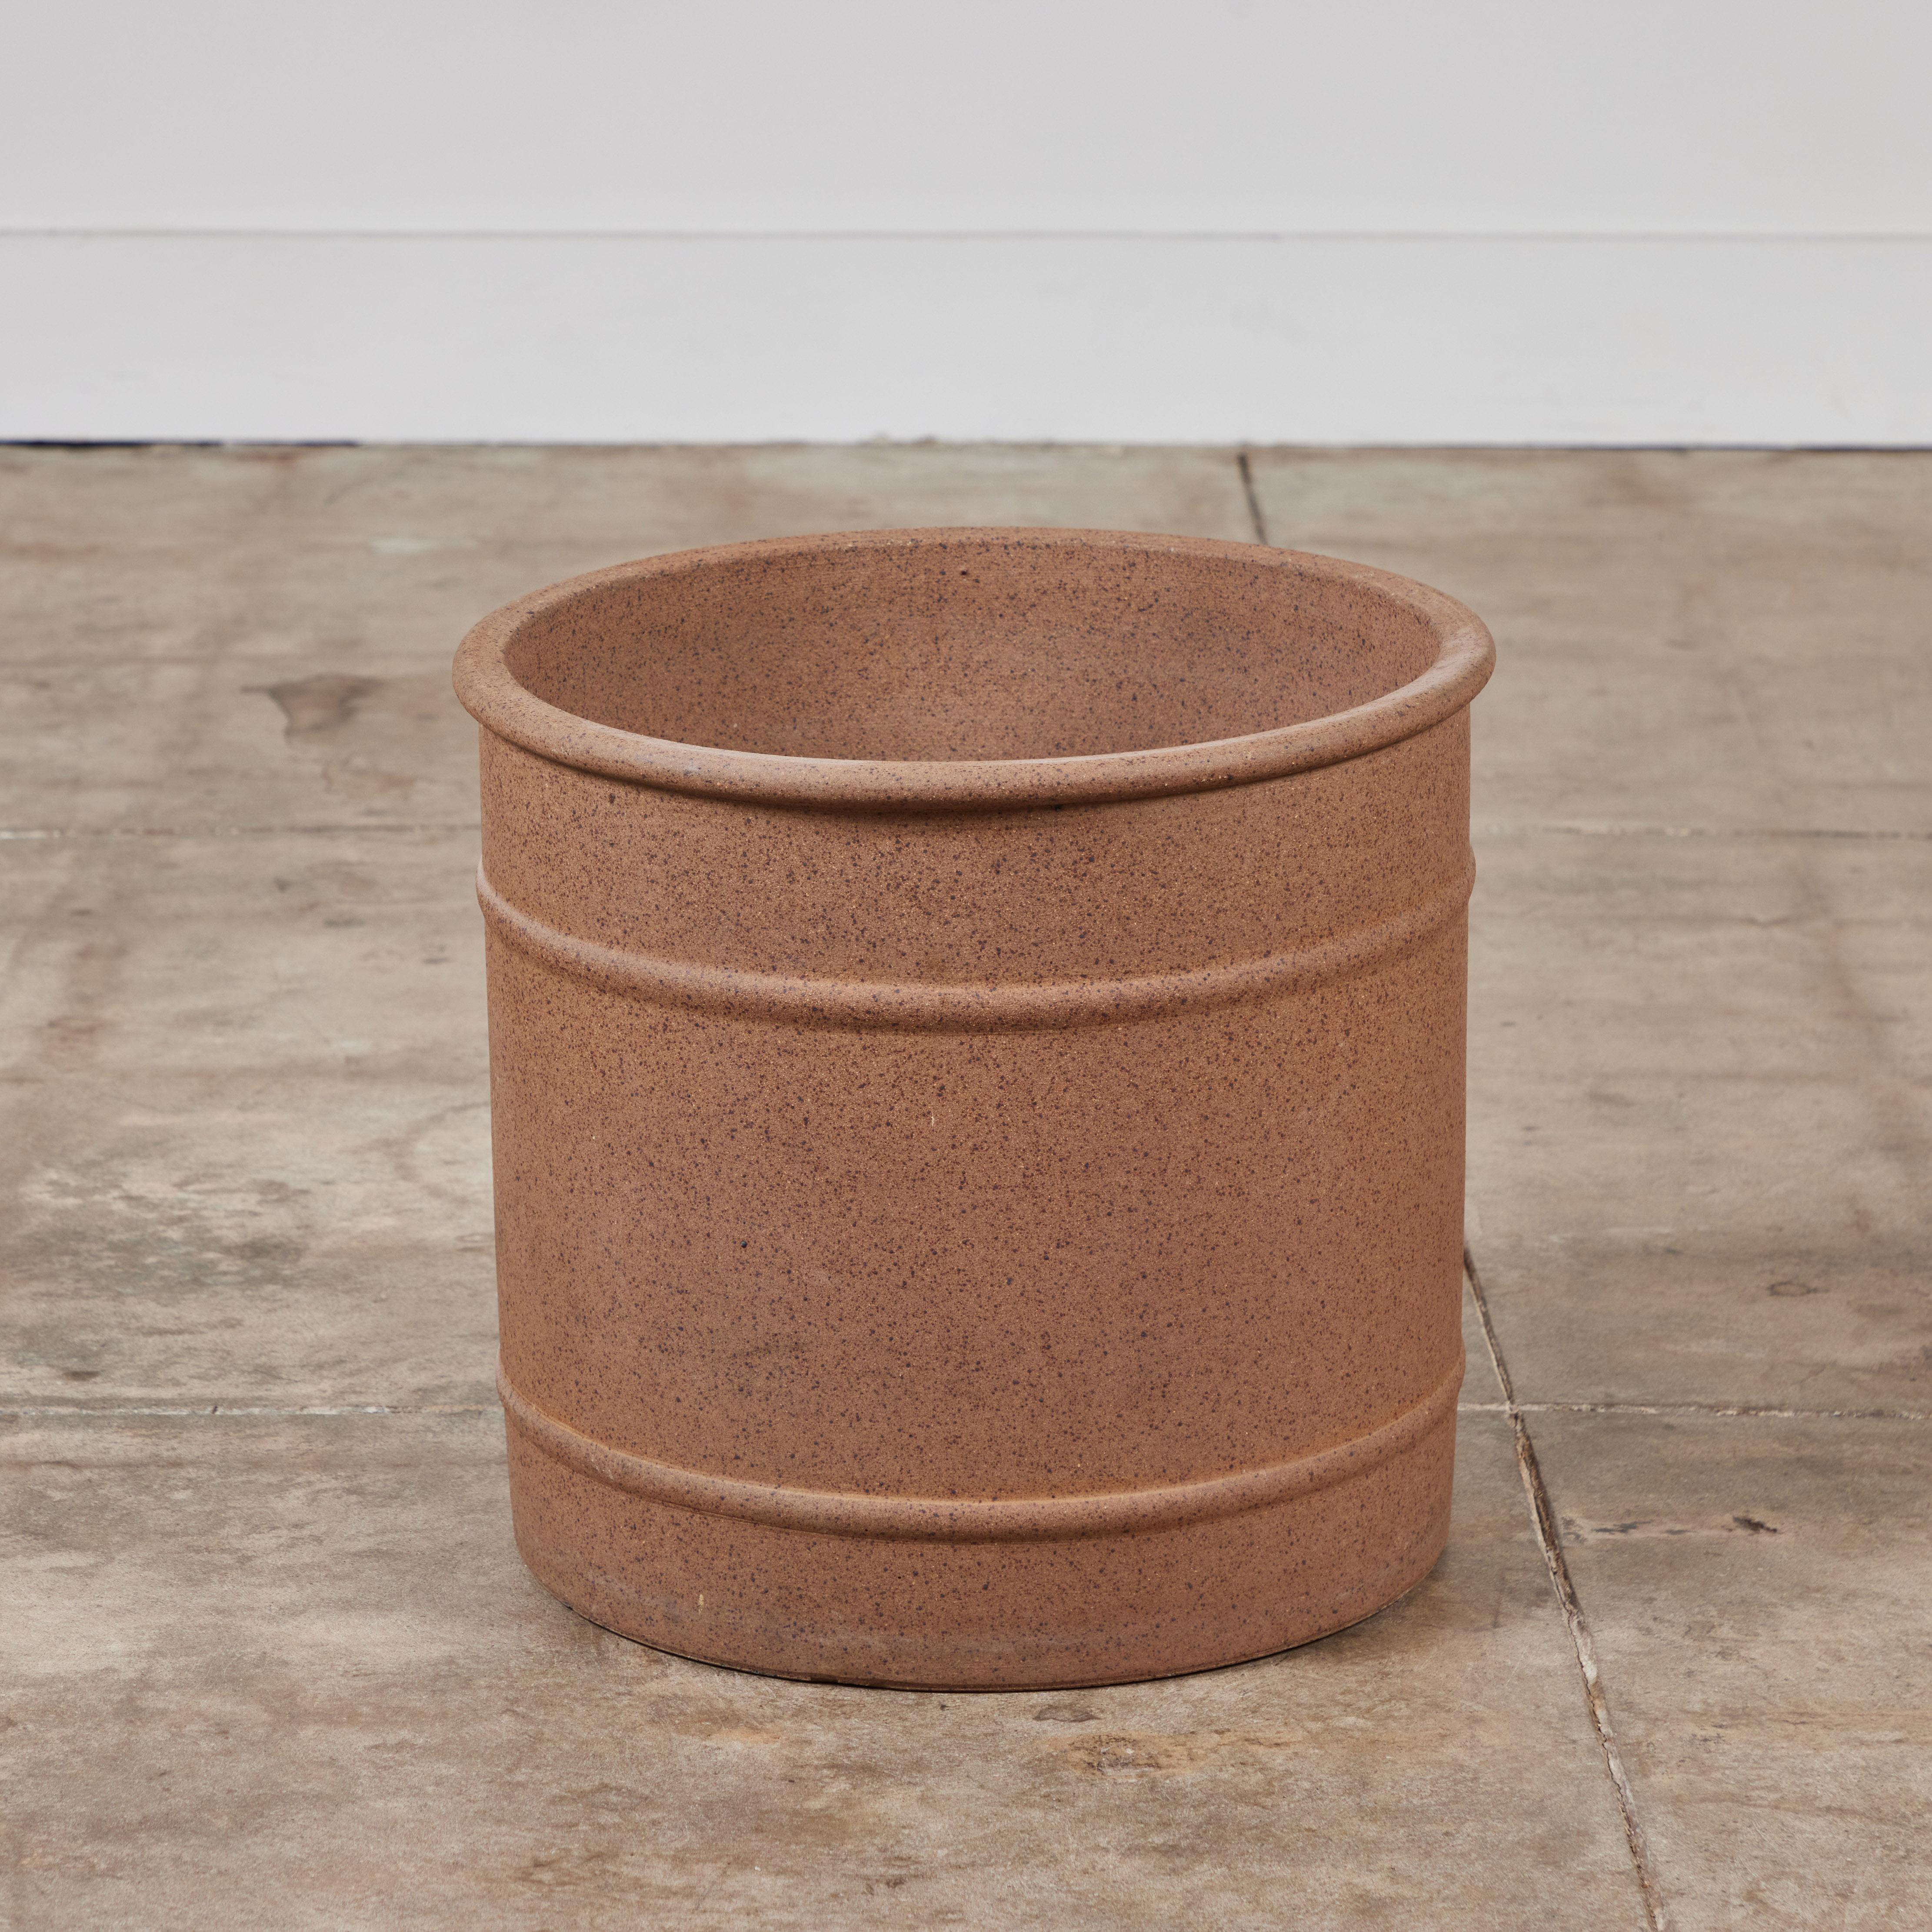 Cylindrical stoneware planter for Architectural Pottery. The 